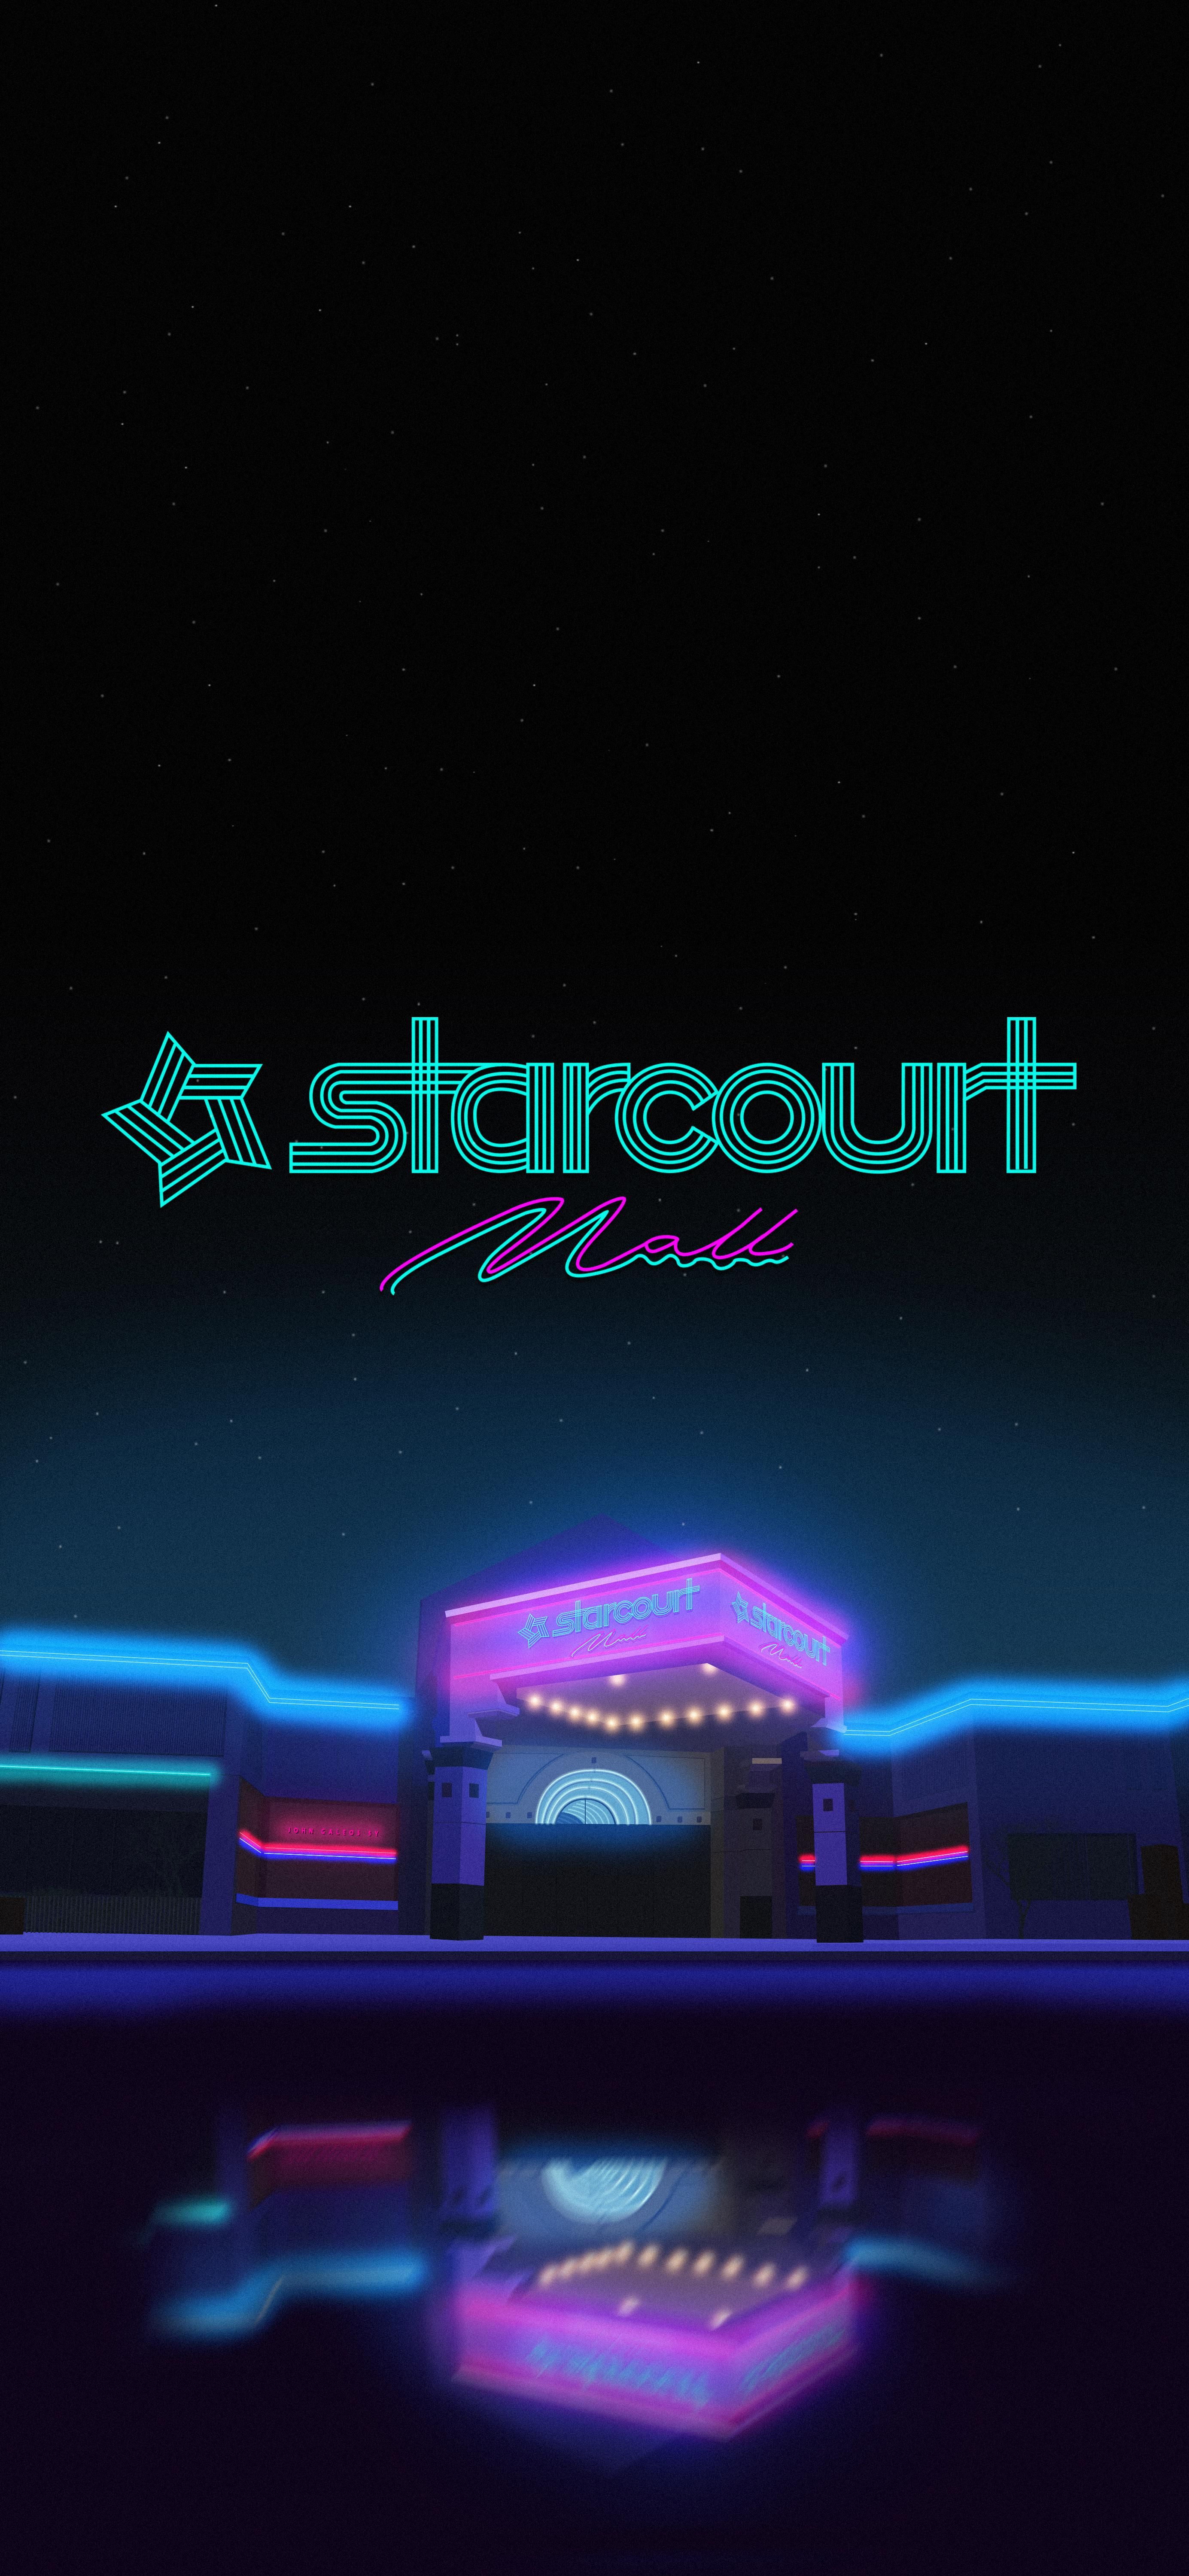 I Made A Wallpaper Featuring Starcourt Mall Not Much Experience